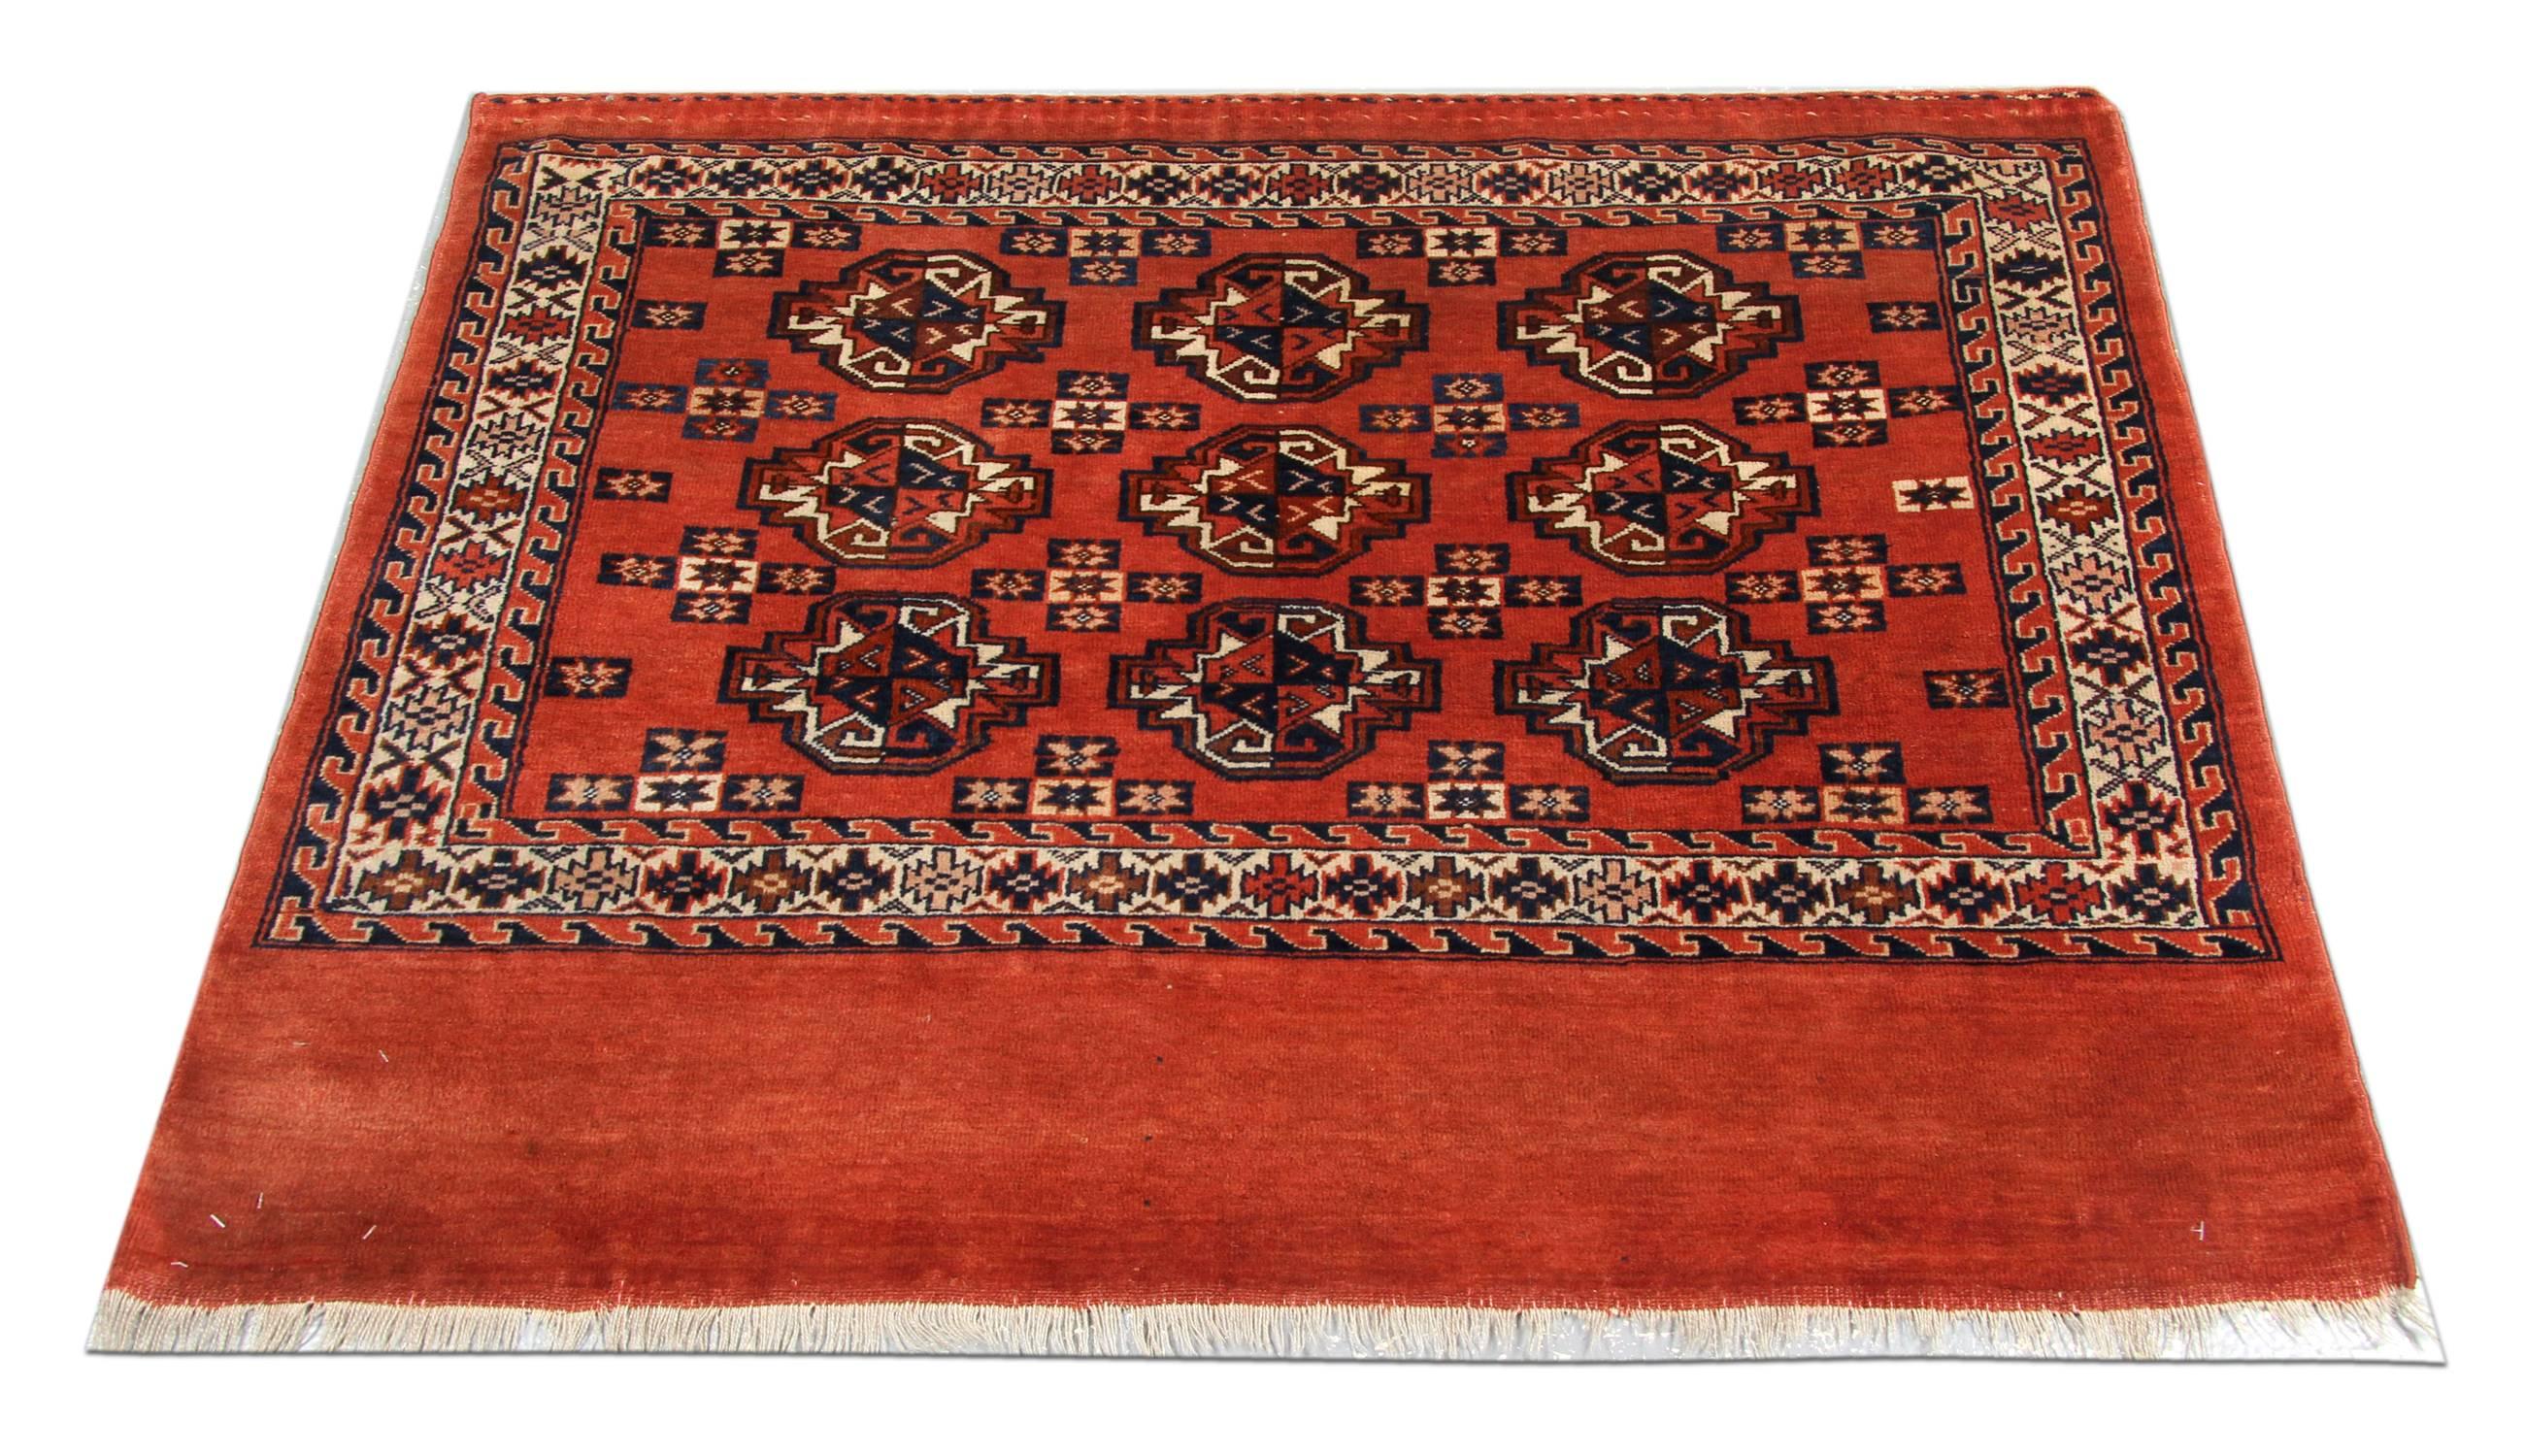 This antique Turkmen rug handwoven wool rug was made using traditional vegetable dyes and handmade by the Turkmen tribespeople. This Rug is predominantly red in colour and has a repeated motif pattern covering the rug. This Antique rug would be